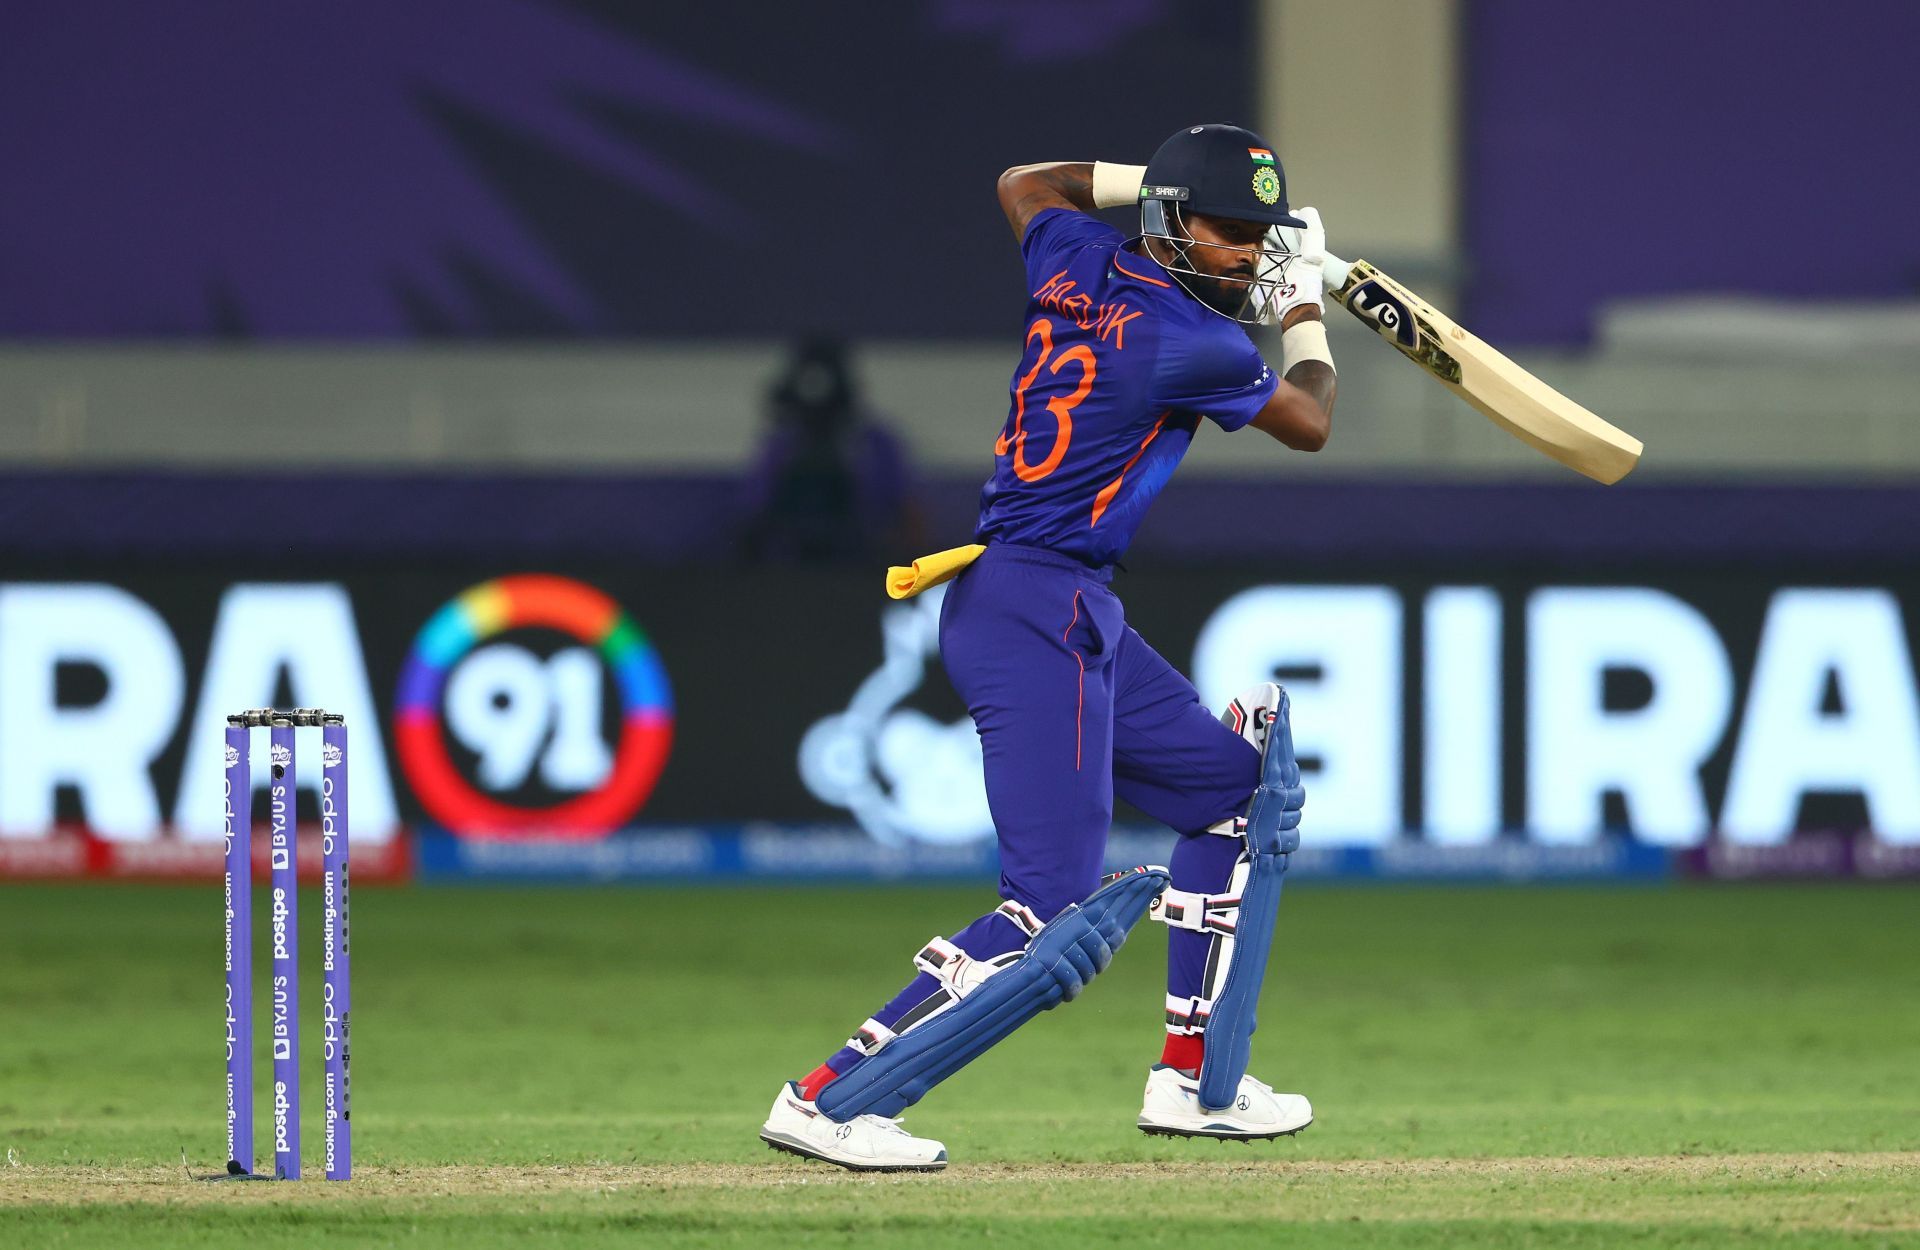 Hardik Pandya was not at his best in the T20 World Cup 2021 match against Pakistan